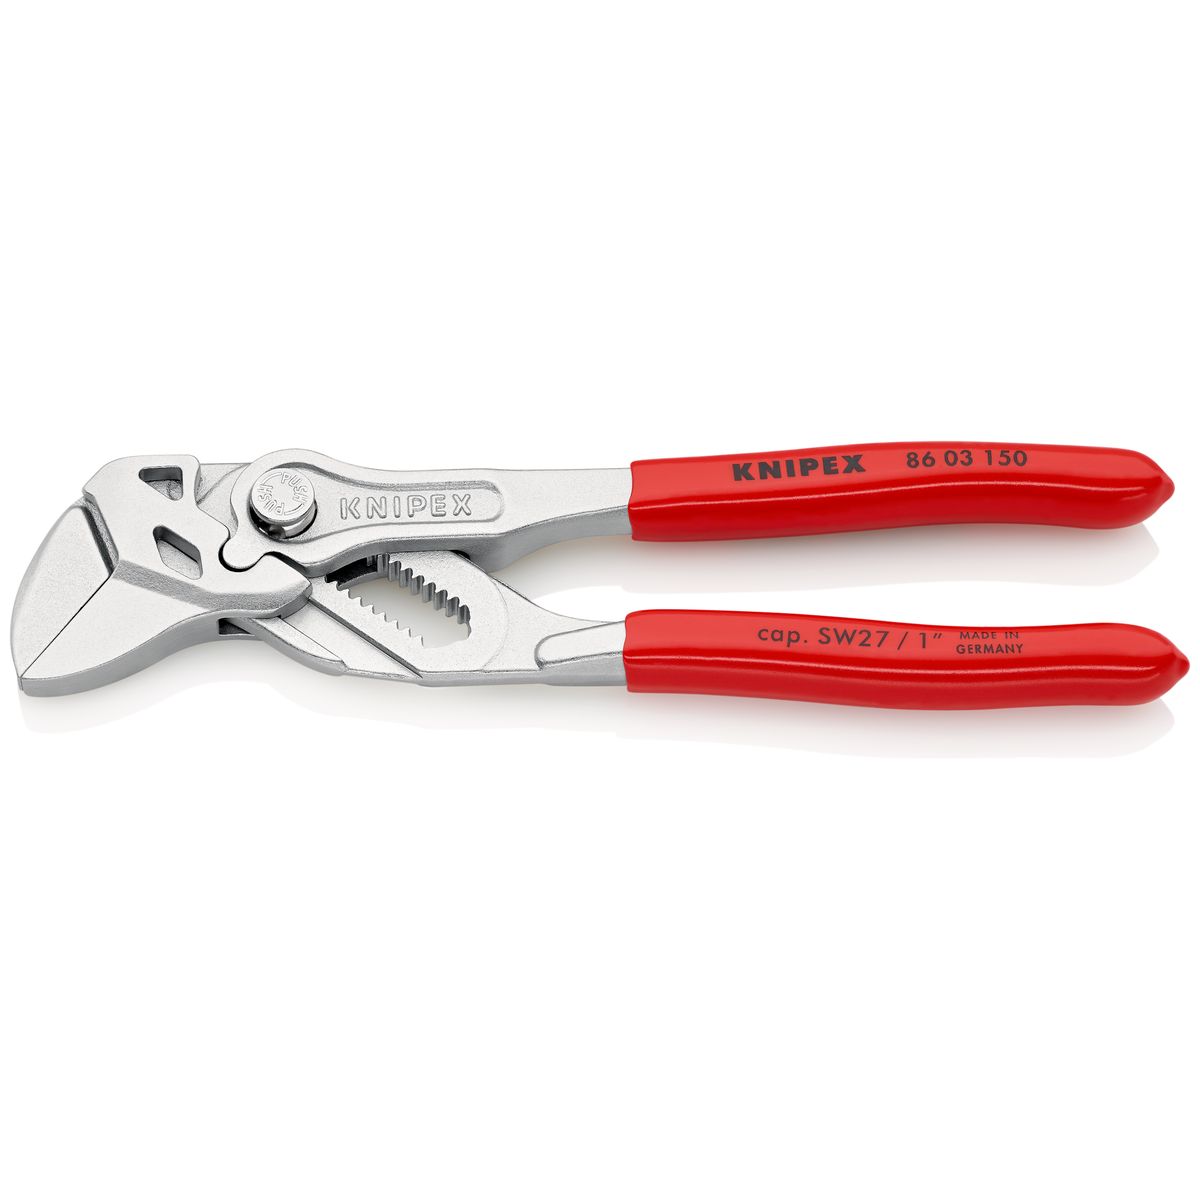 PLIER WRENCHES 8603150 Knipex